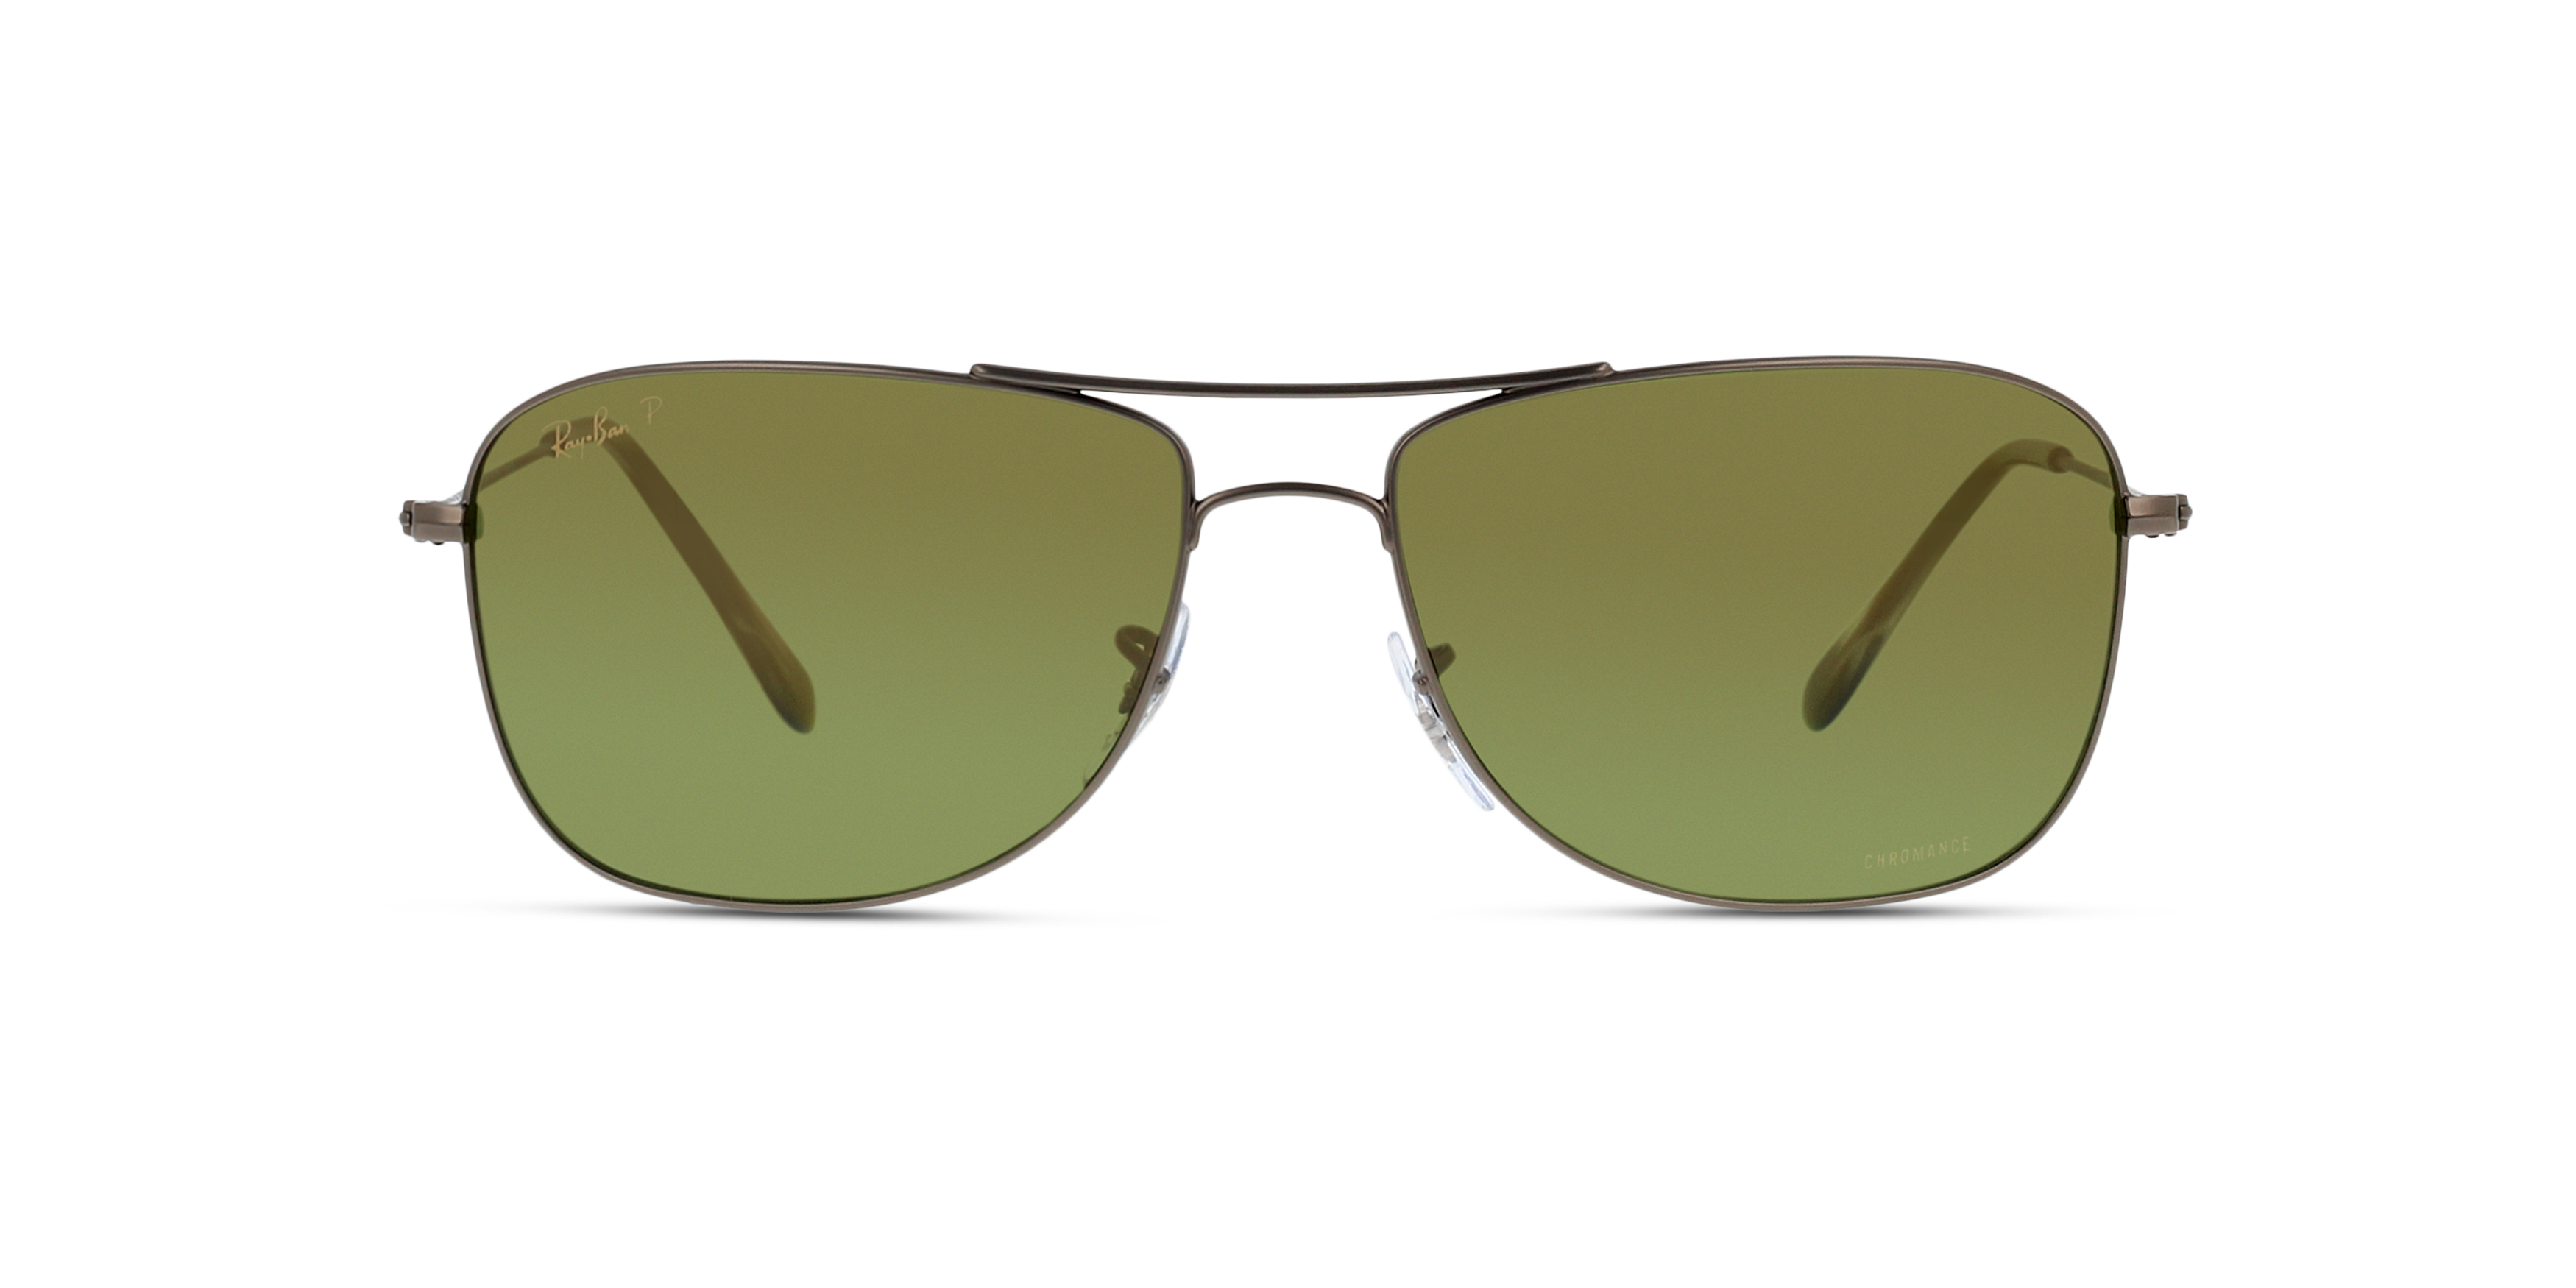 [products.image.front] Ray-Ban Chromance RB3543 029/6O